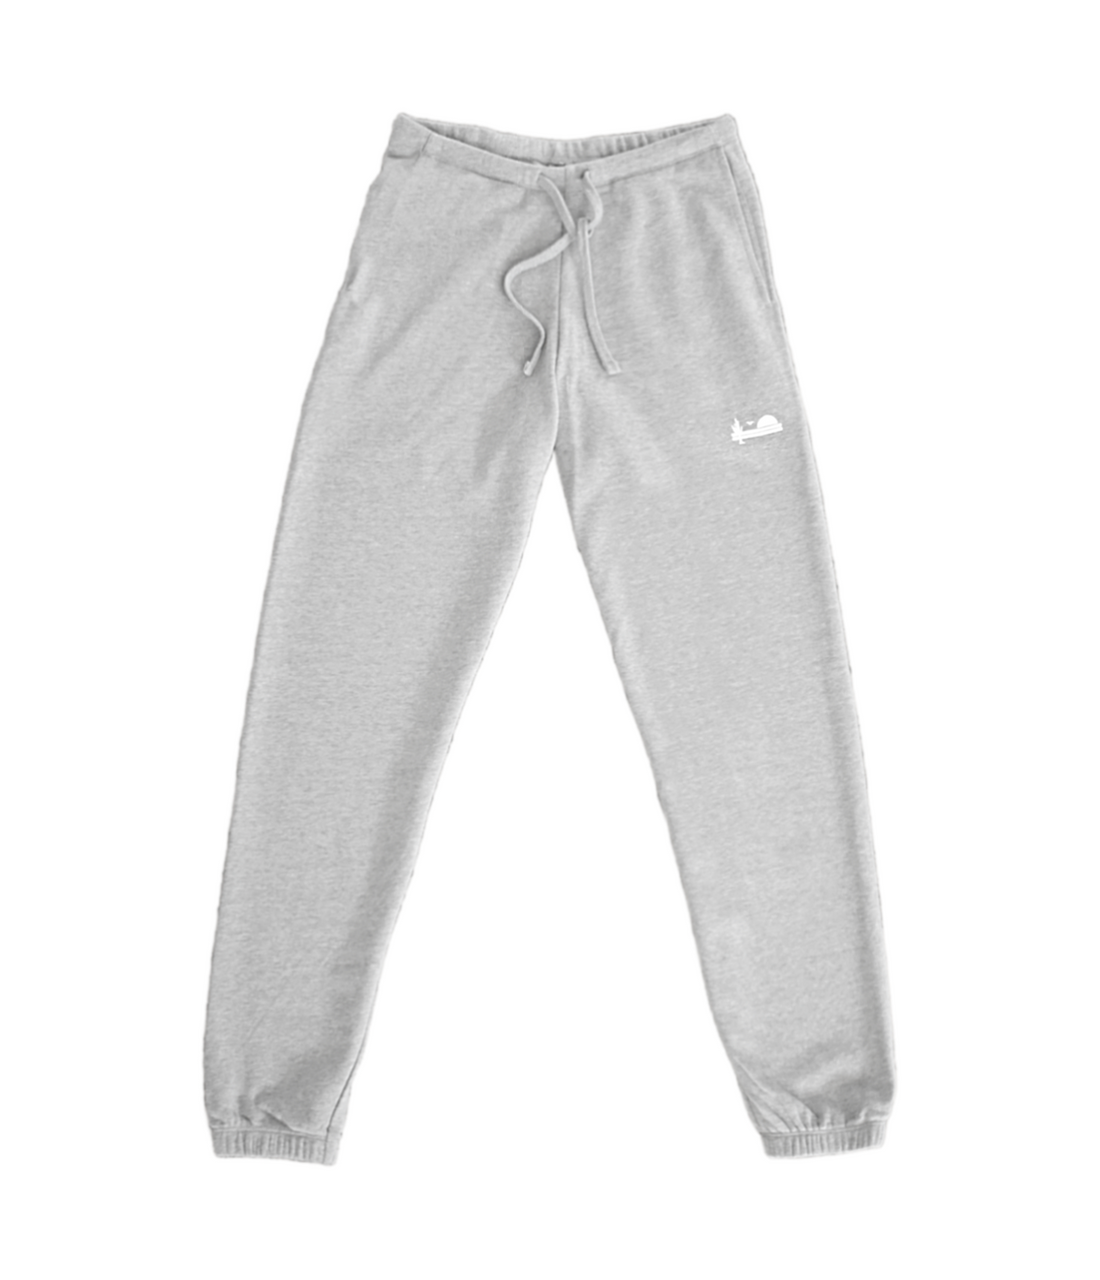 Incredibly soft grey sweatpants. The elastic on the bottom gives them the jogger feel. A thick drawstring on the top ensures a comfortable fit. The left side of the sweats features The Lomas Brand logo in white. The logo has a saguaro cactus, bird, and a rising sun.